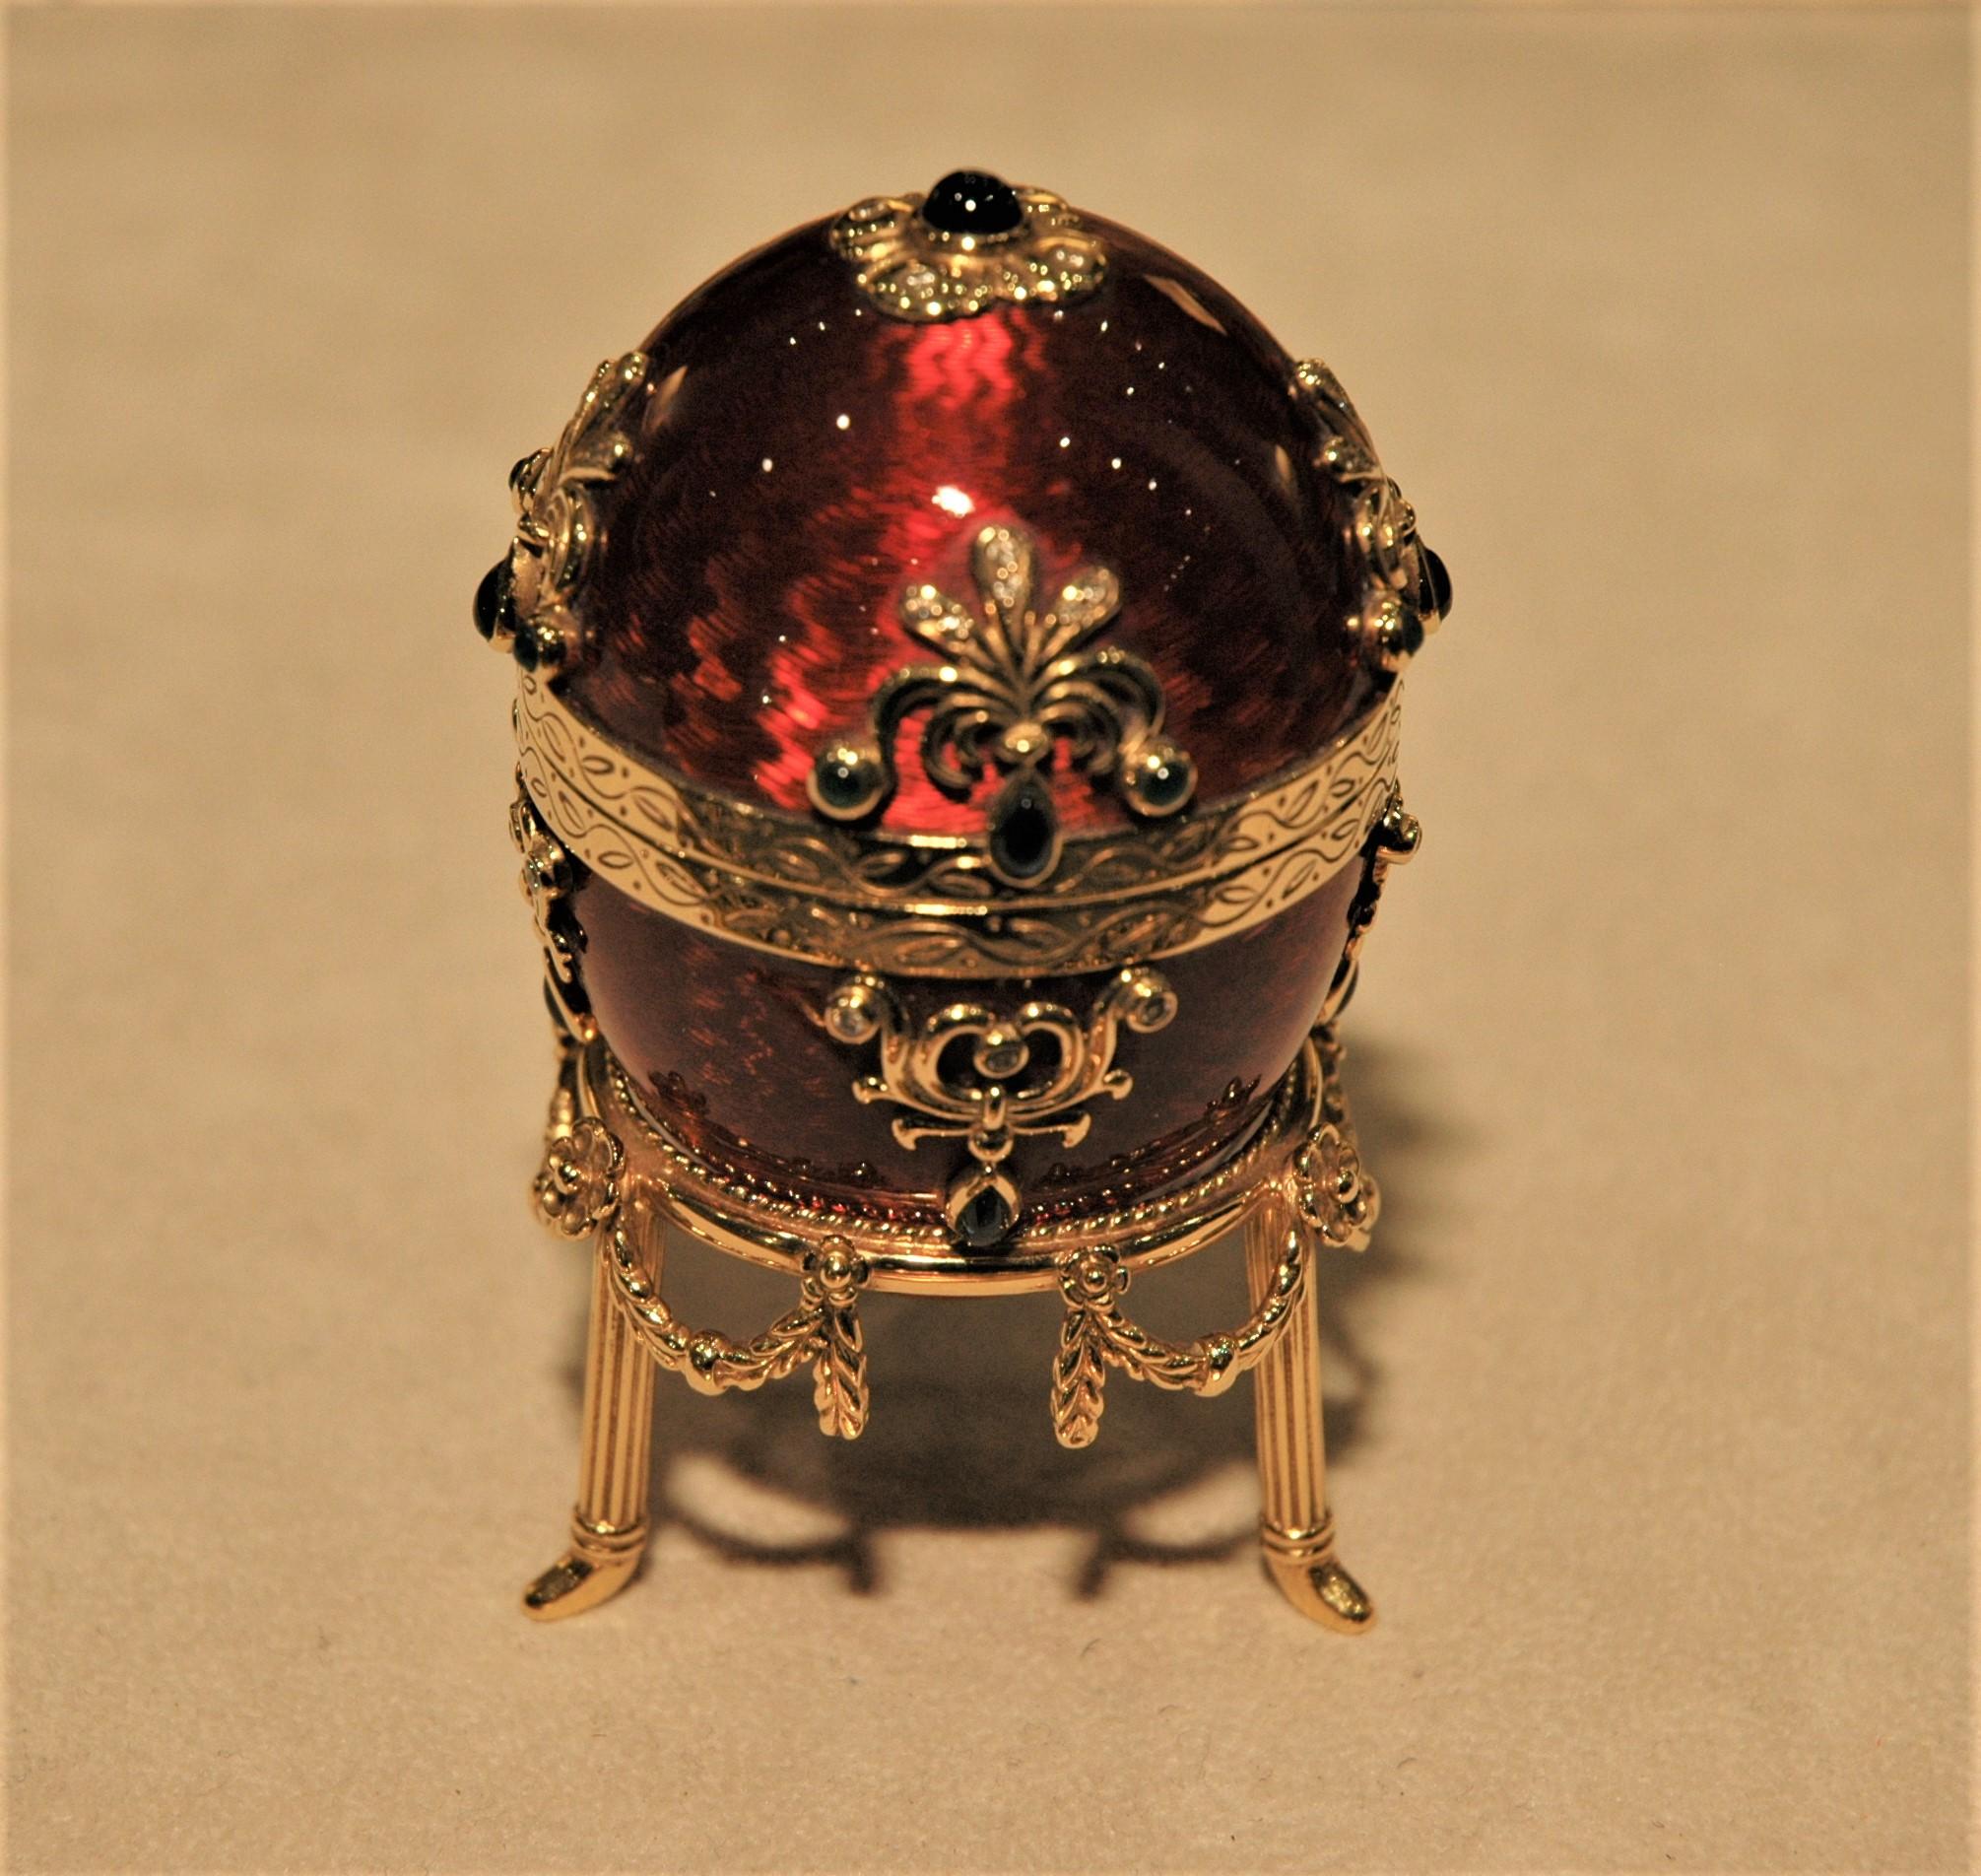 Rare Fabergé gold egg with its gold stand. It is decorated with red guilloche enamel and precious stones: emeralds (0.40 carats), sapphires (3.15 carats), diamonds (0.56 carats). It is openable and you can put a special ring inside. It is a limited